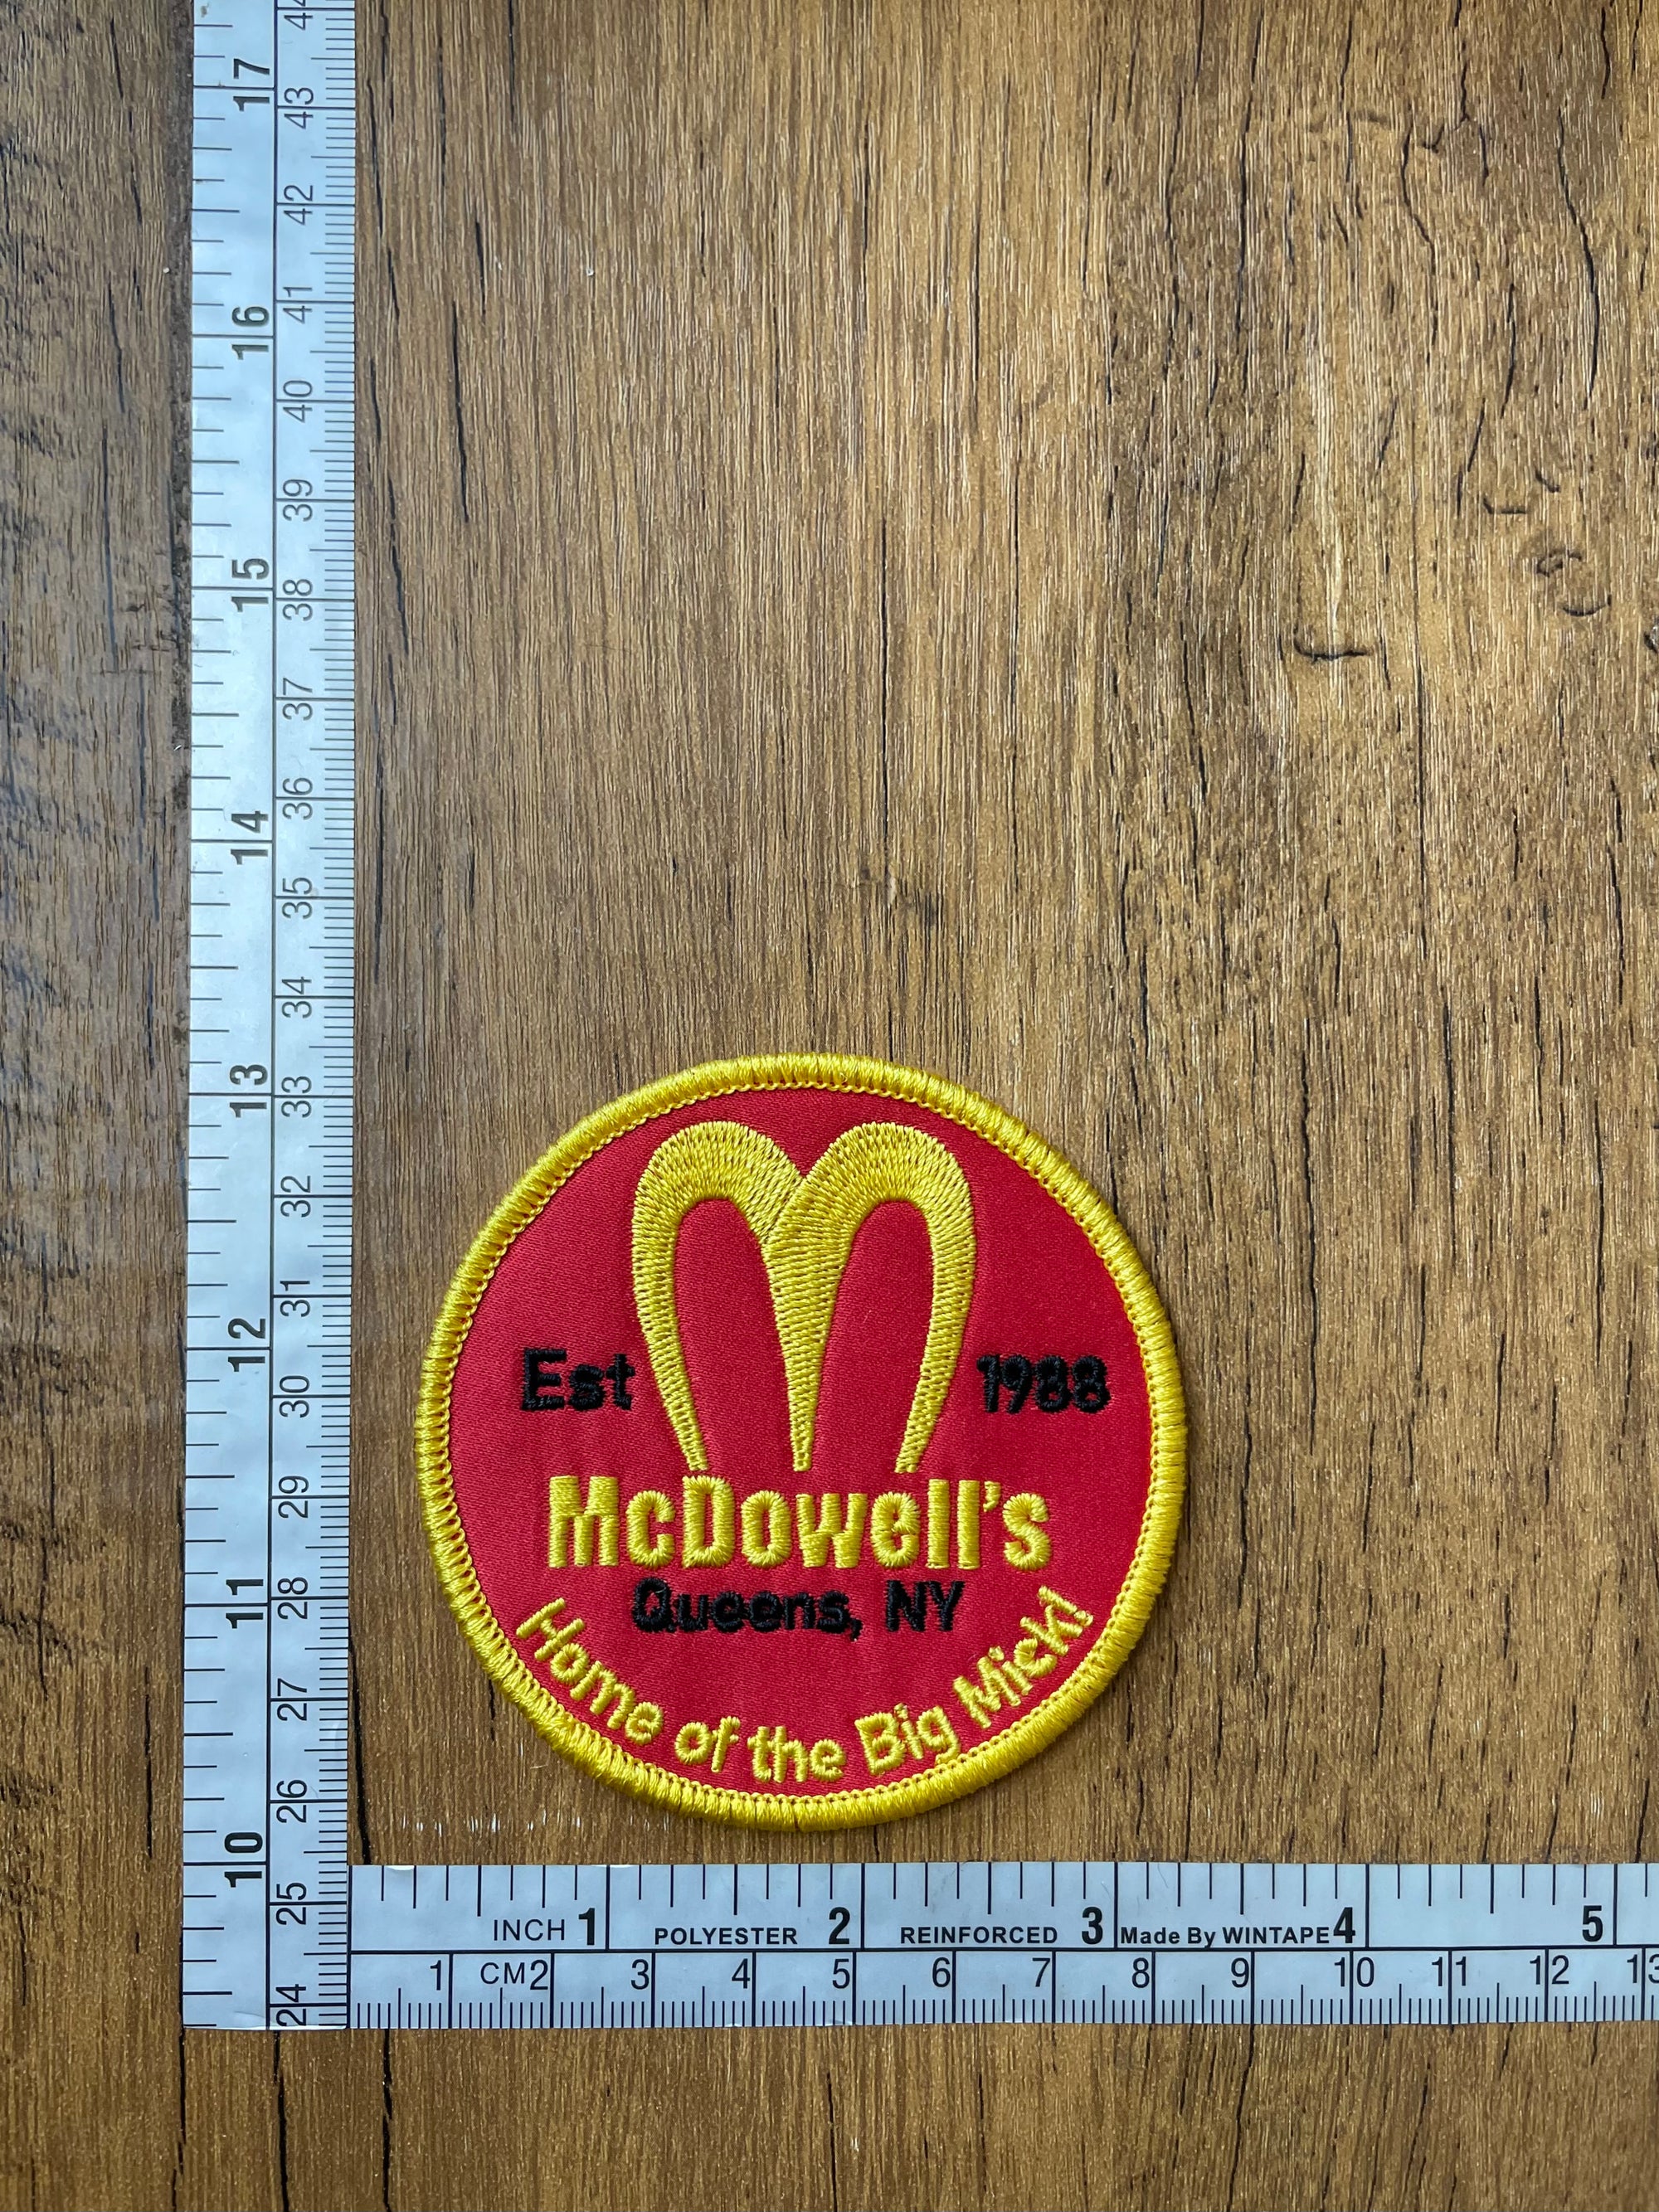 McDowell’s Queens, NY. Home of the Big Mick!